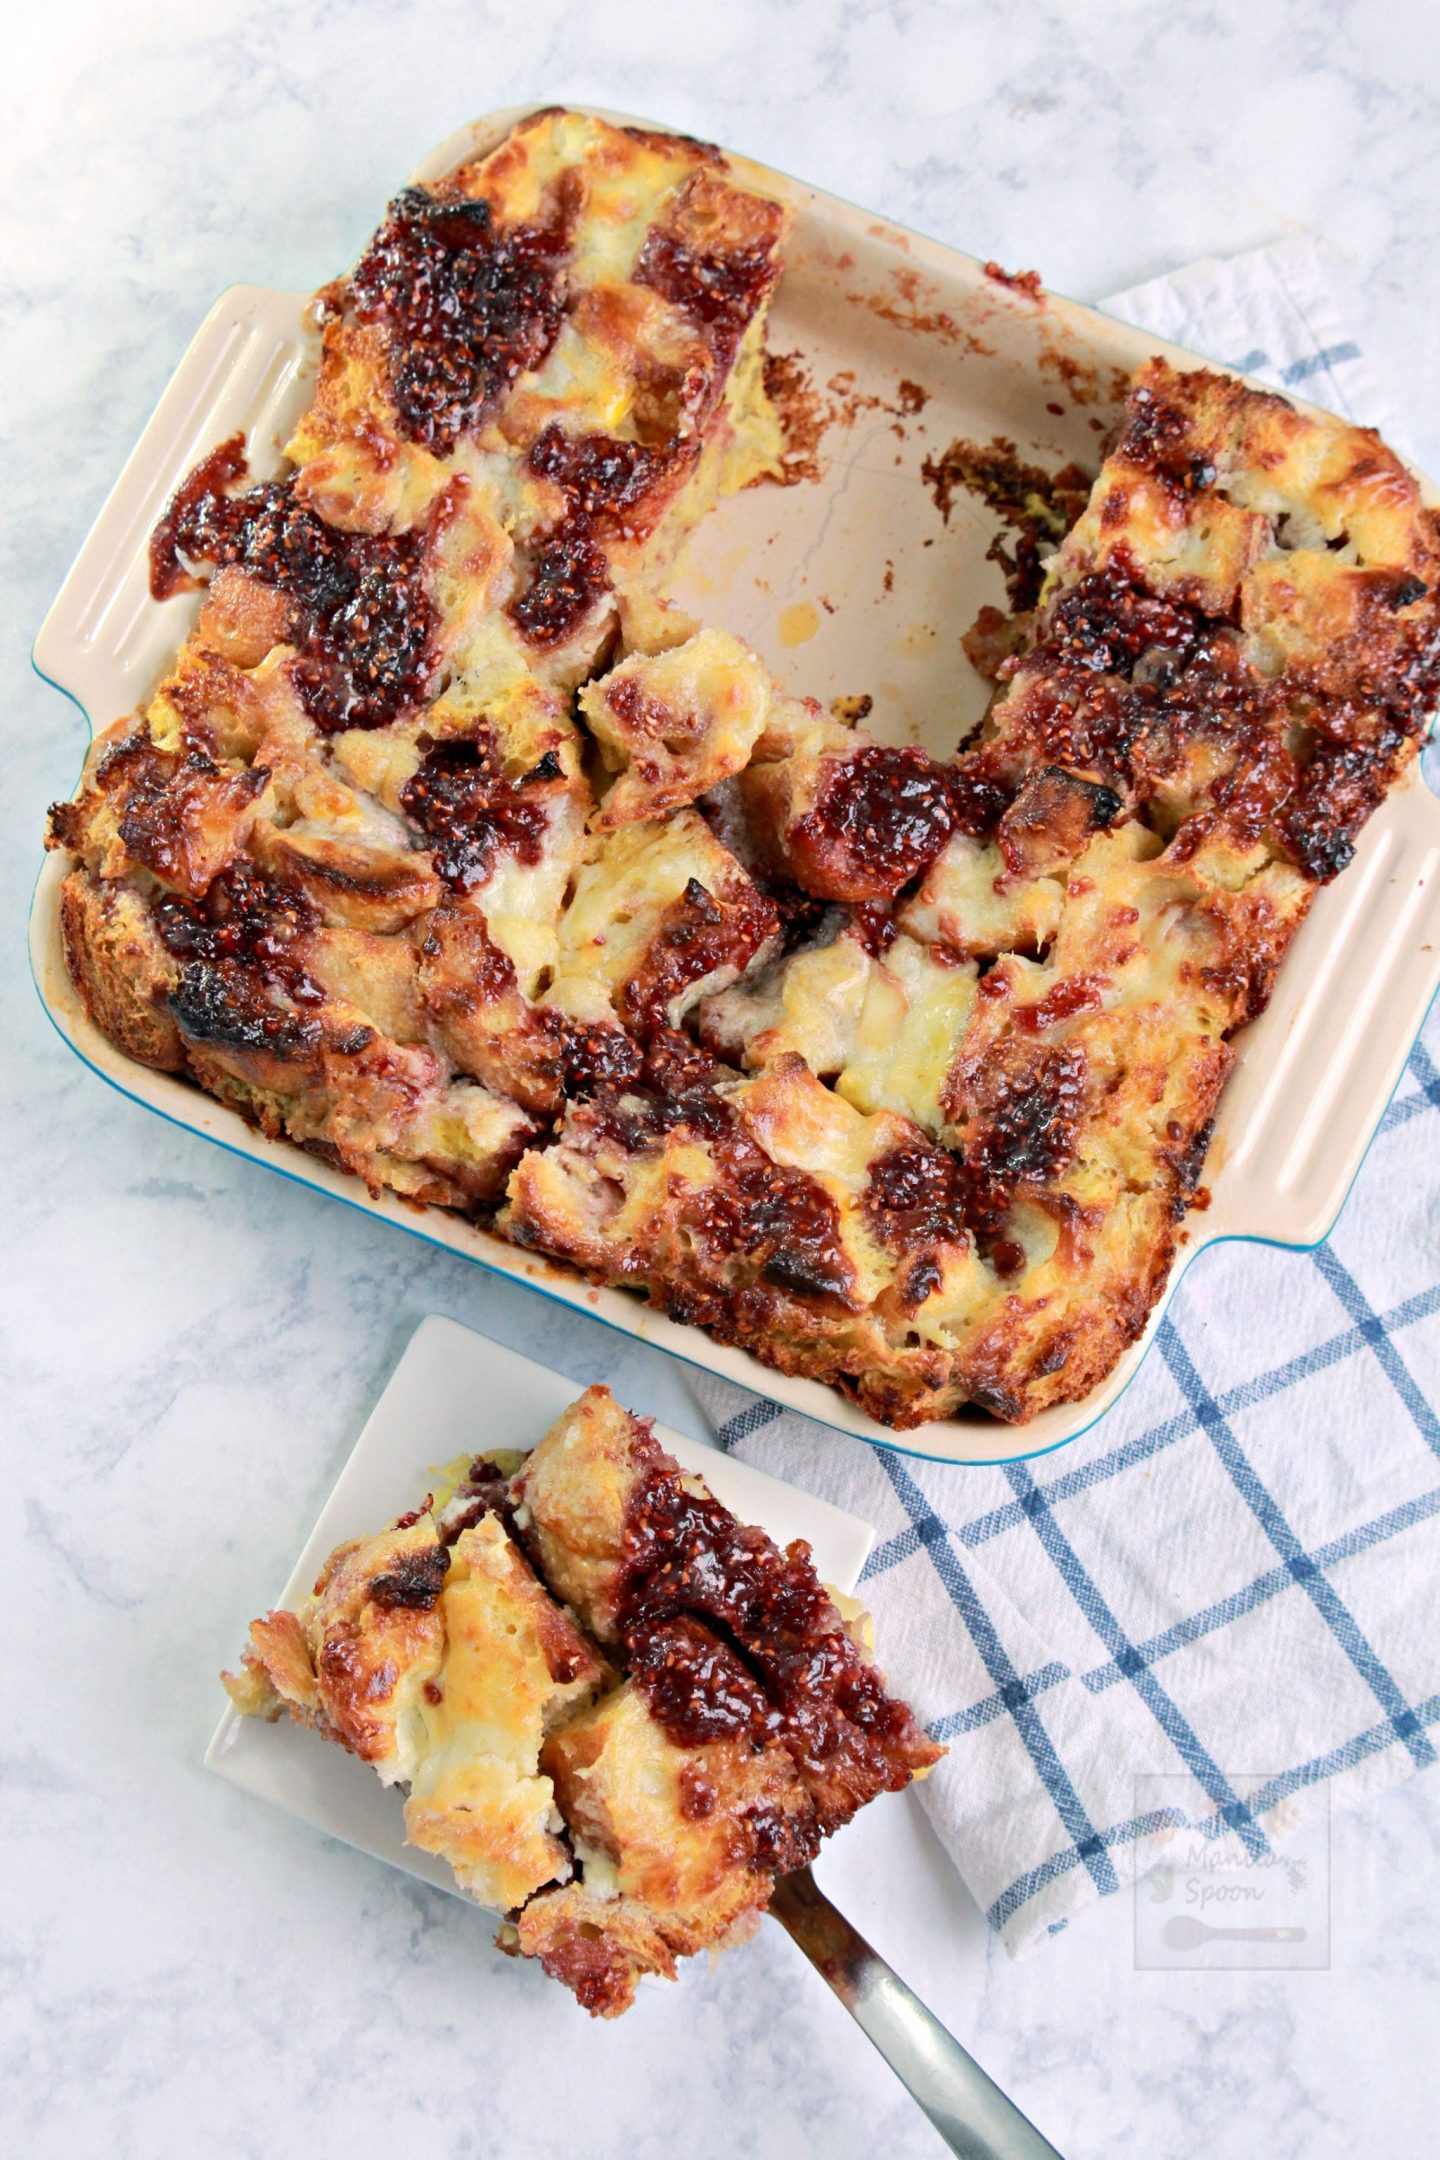 Such a show-stopping breakfast or dessert - this delicious bread pudding is loaded with creamy mascarpone cheese and strawberry jam. For a different spin - use fresh berries that are in season! So good!